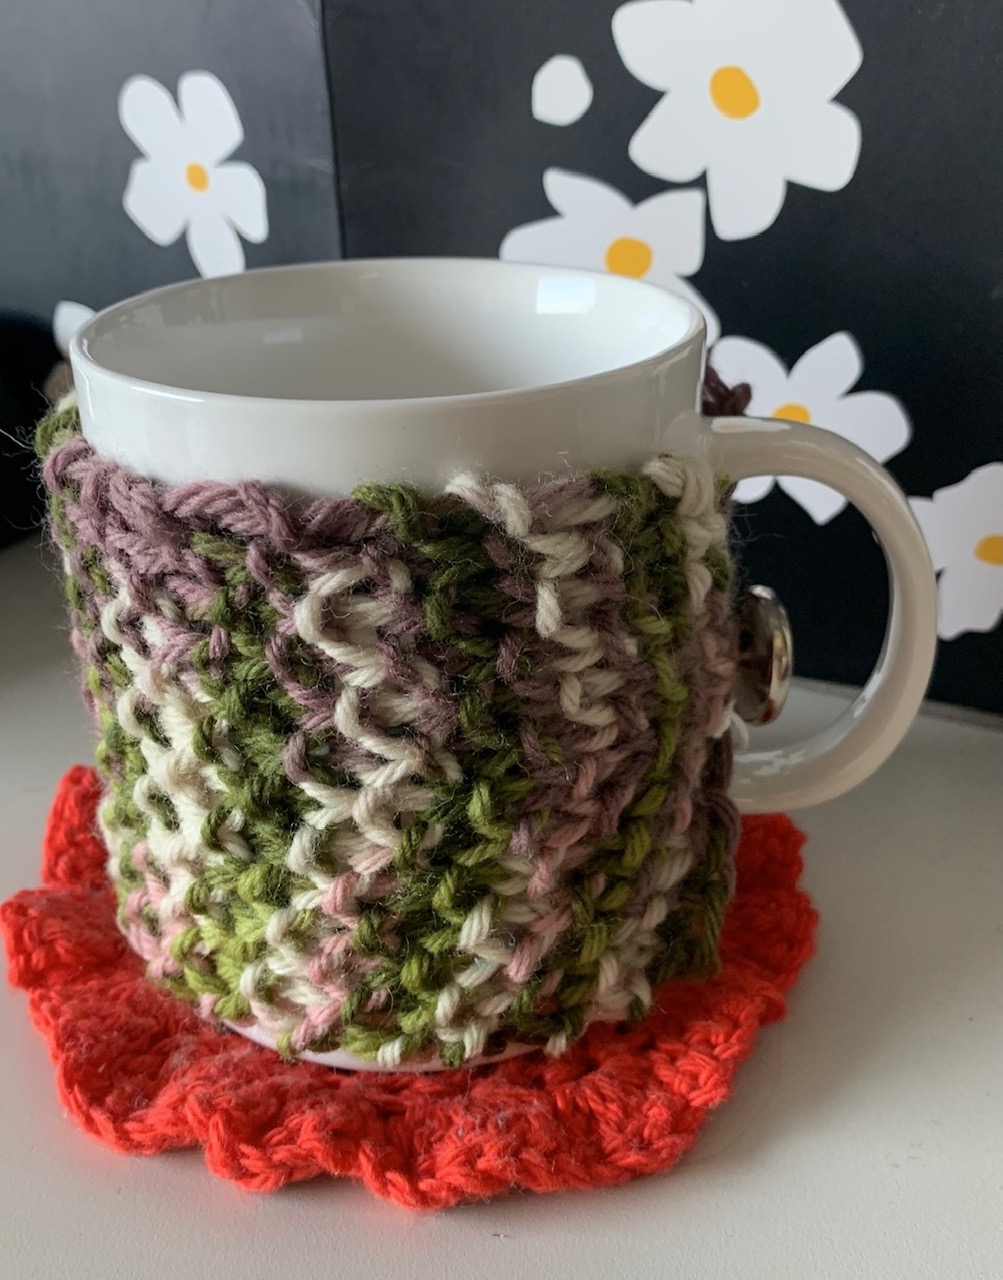 A mug with a multi-colored knitted cozy